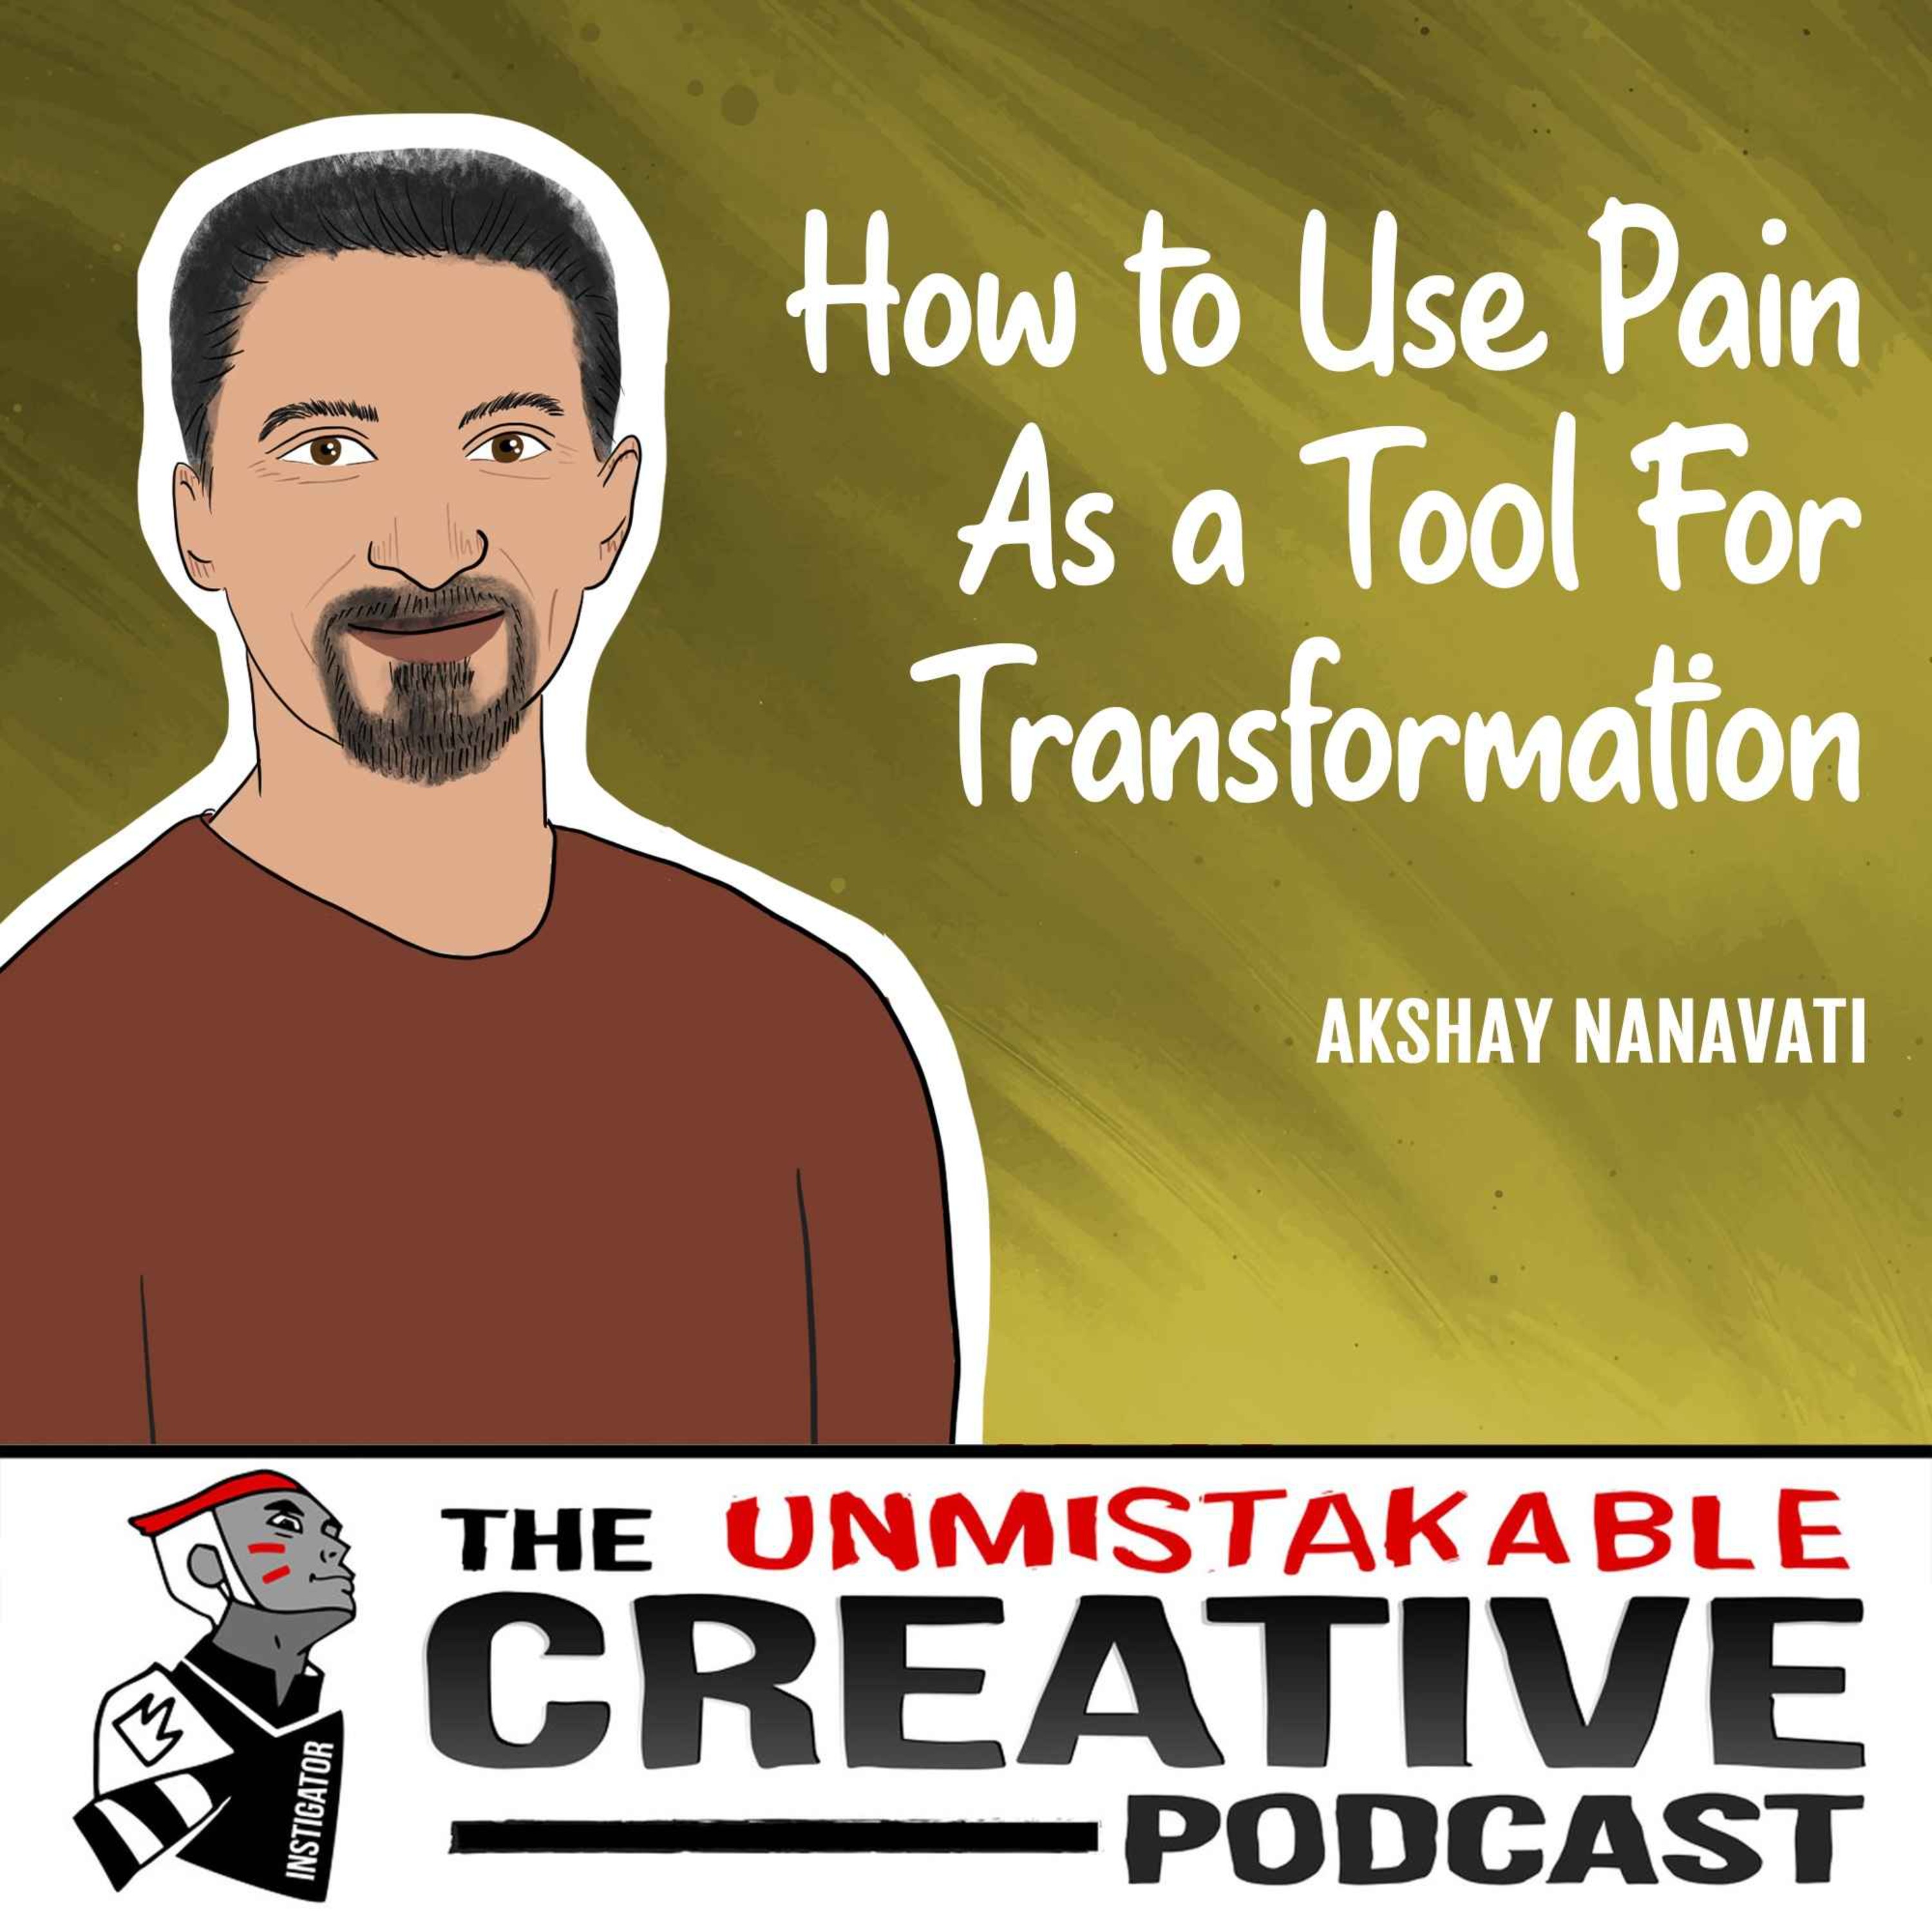 Akshay Nanavati | How to Use Pain as a Tool for Transformation Image